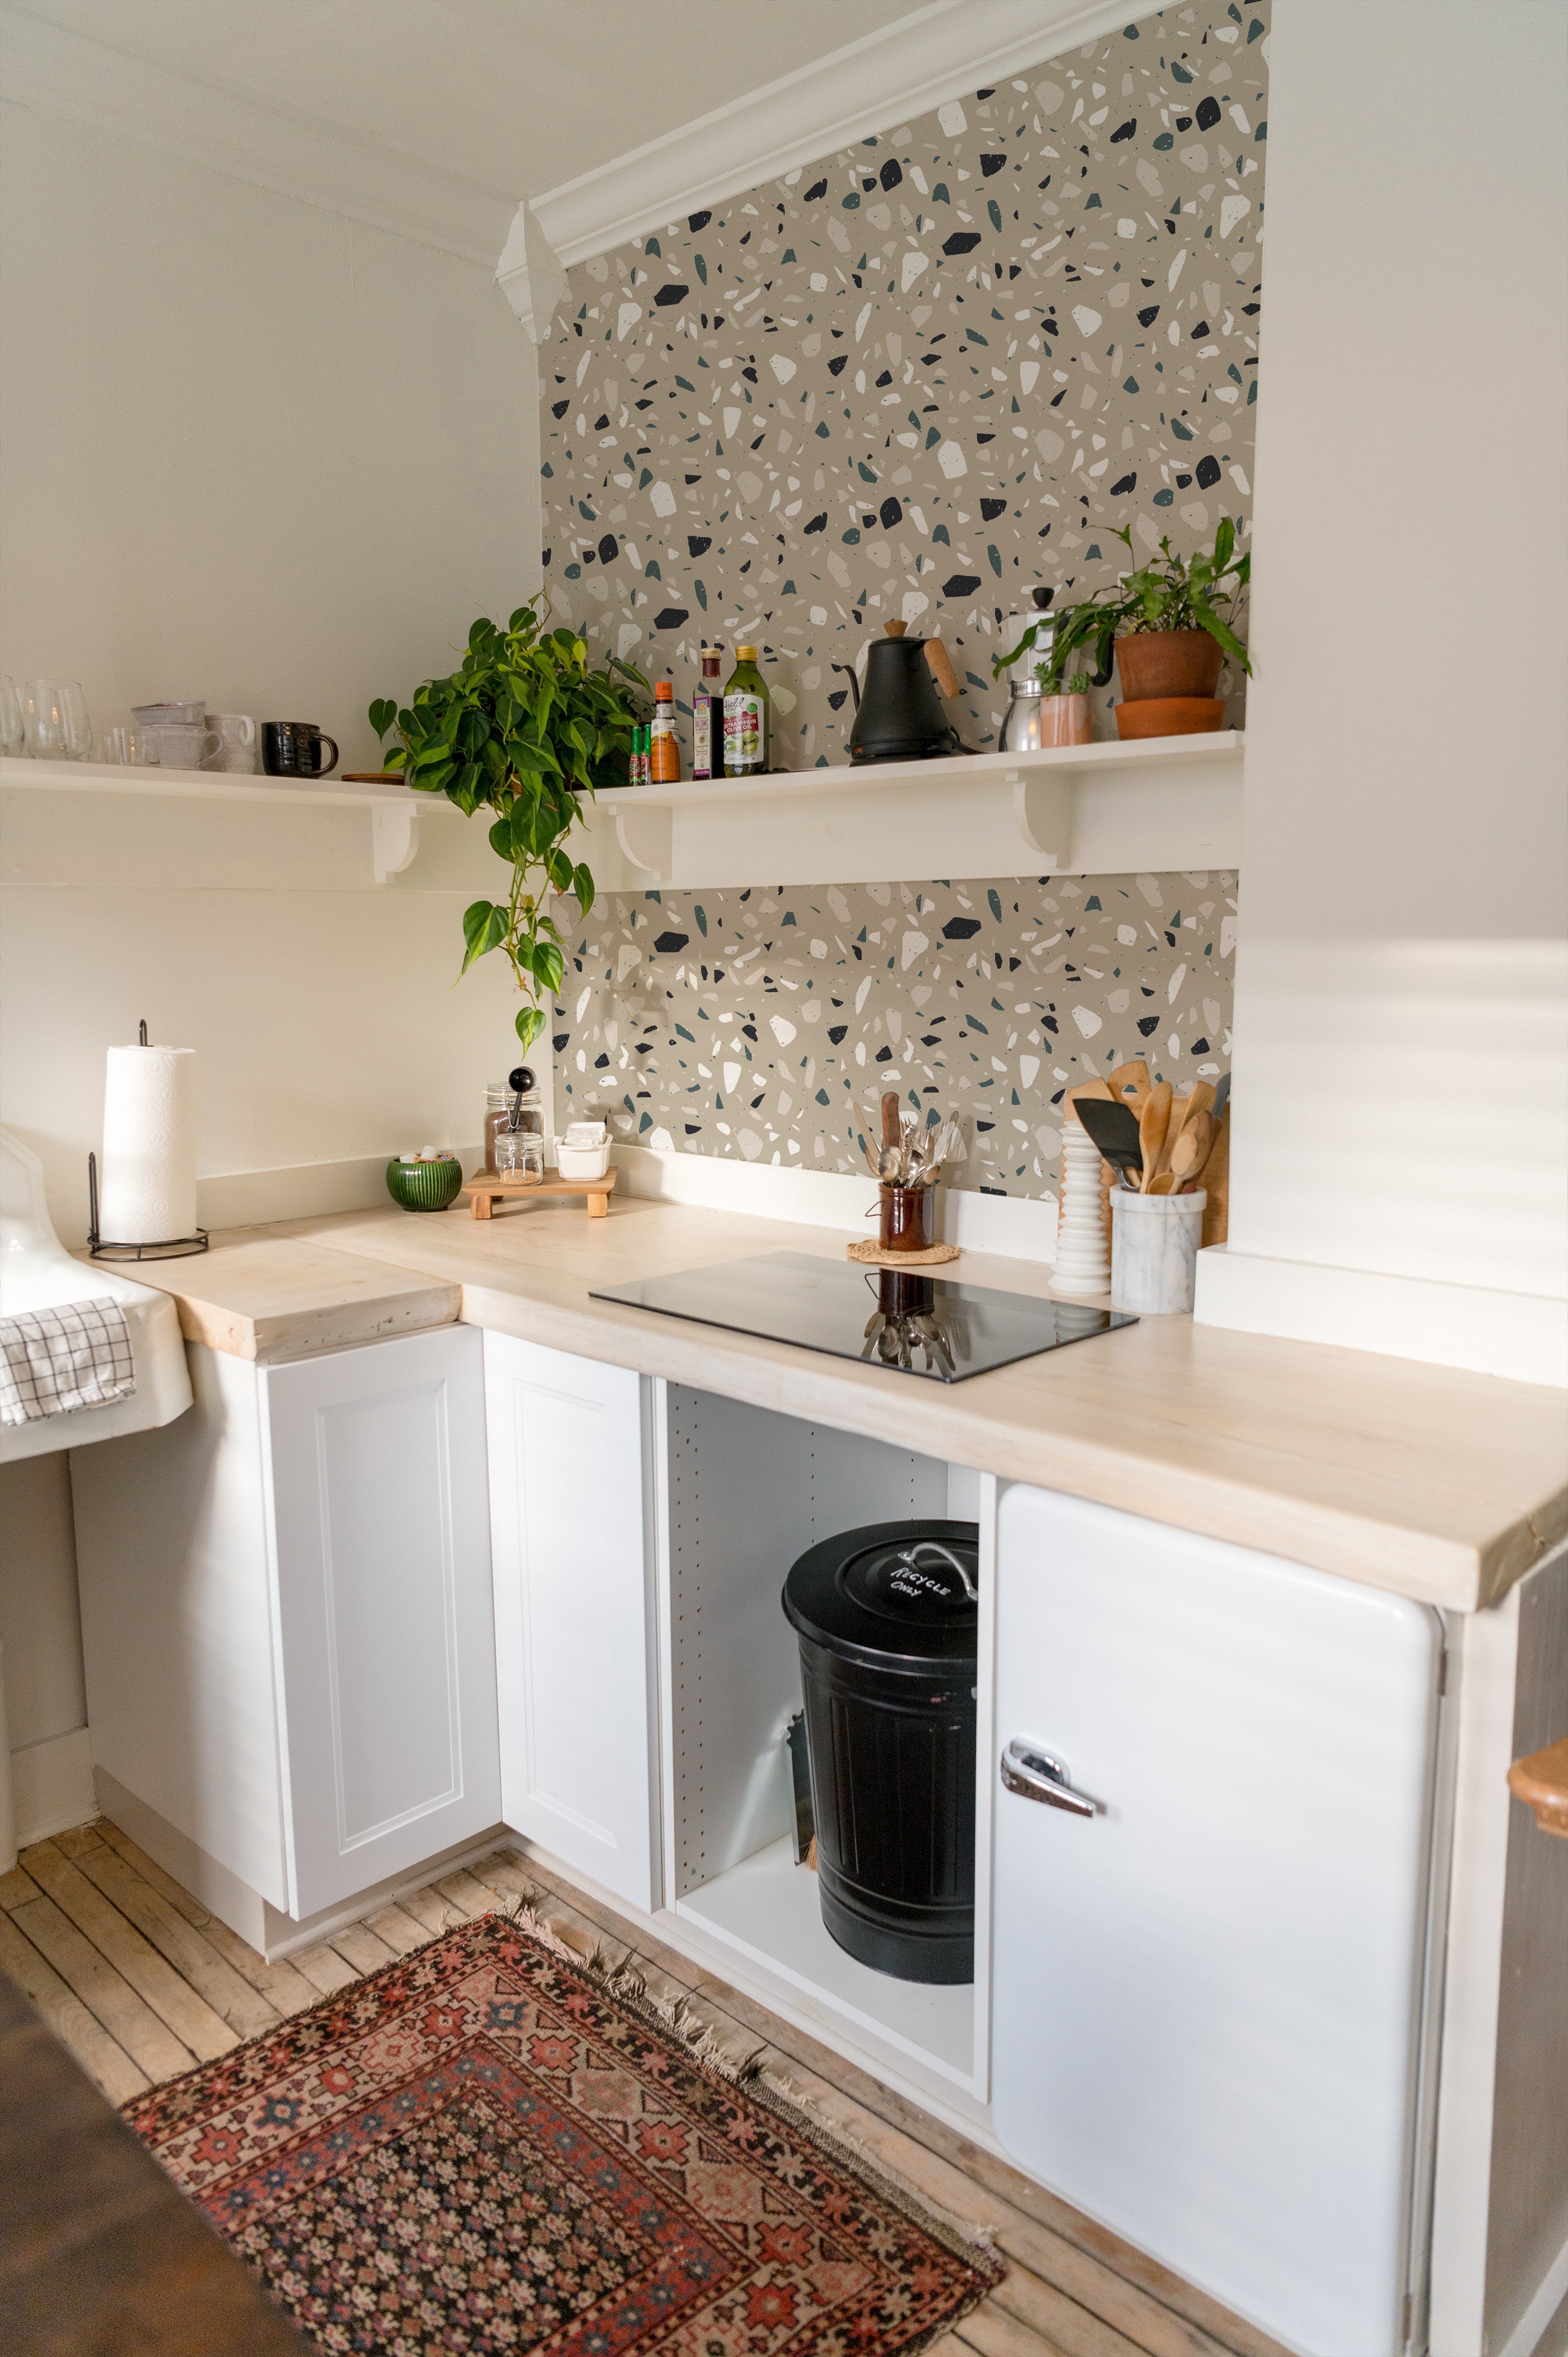 A kitchen setting featuring the Earthen Terrazzo Wallpaper as a backsplash, enhancing the space with its stylish terrazzo pattern of irregular shapes in muted tones. The design complements the white cabinetry and natural wood countertops, creating a modern yet earthy ambiance.